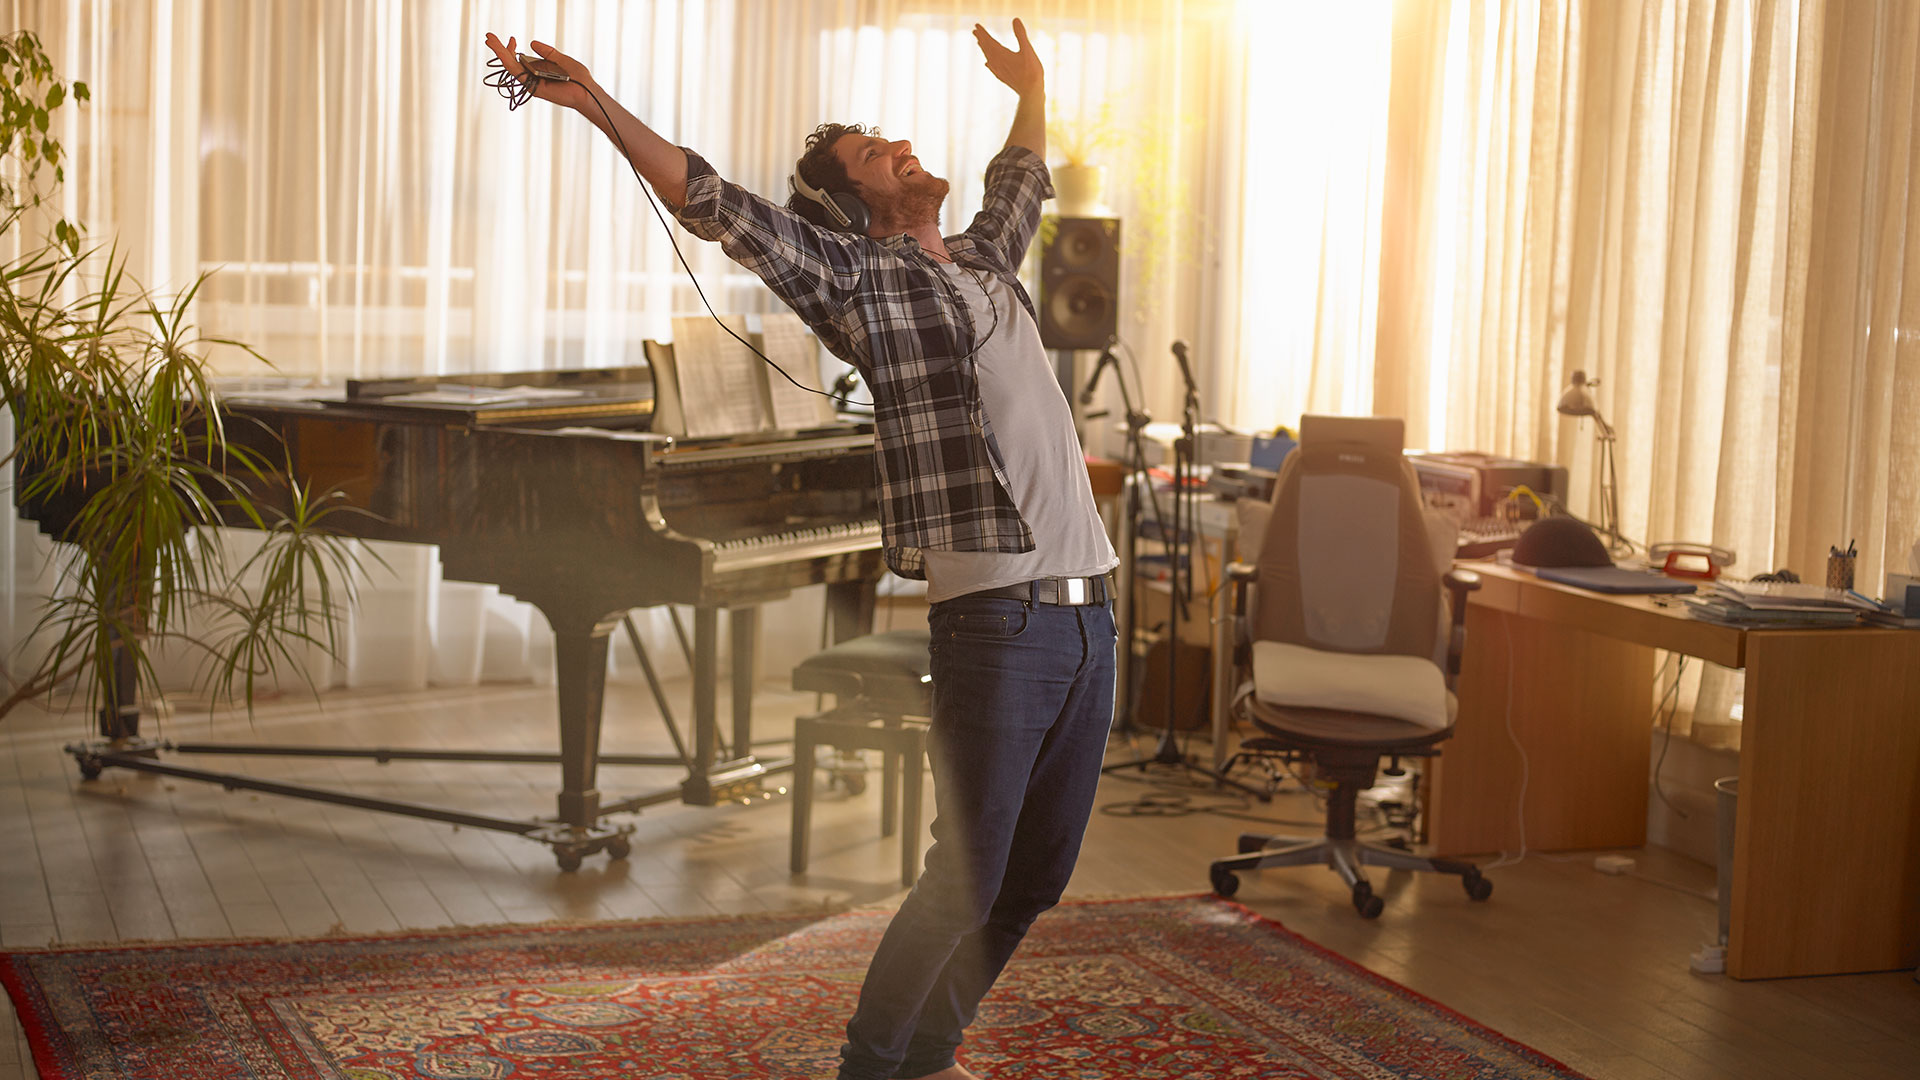 Dancing Gets Your Heart Rate Up And Makes Your Muscles Work (Gettyimages)